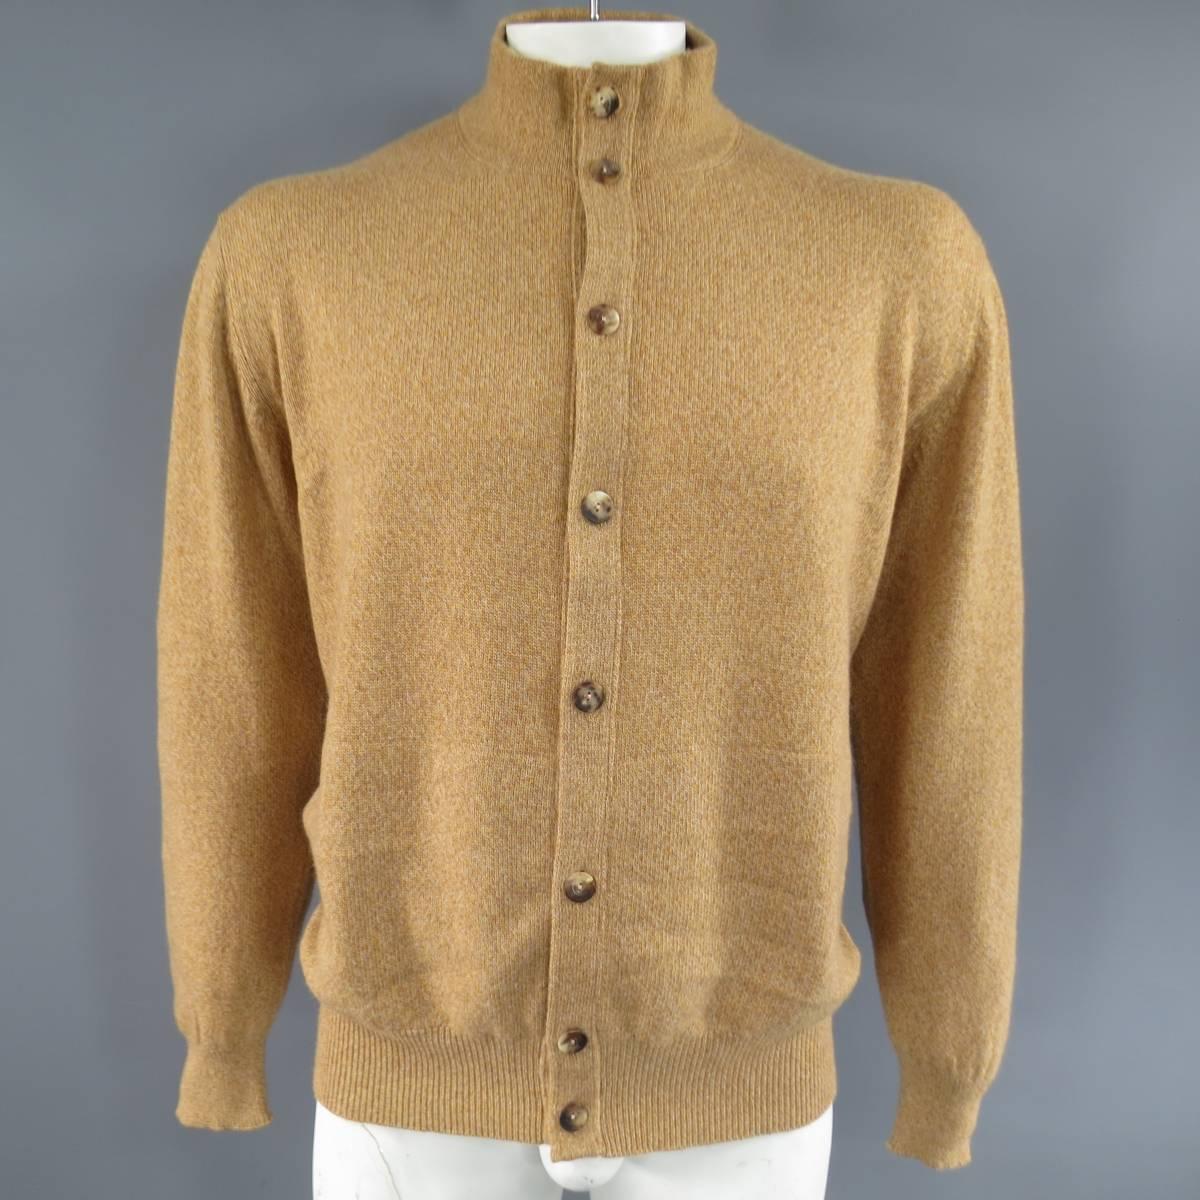 LORO PIANA Cardigan consists of 100% cashmere material in tan color tone. Designed in a high-collar style, button-up front, heather knit pattern throughout body. Detailed with rib cuff's and hem. Comes with original tag. Made in Italy.
Retails at